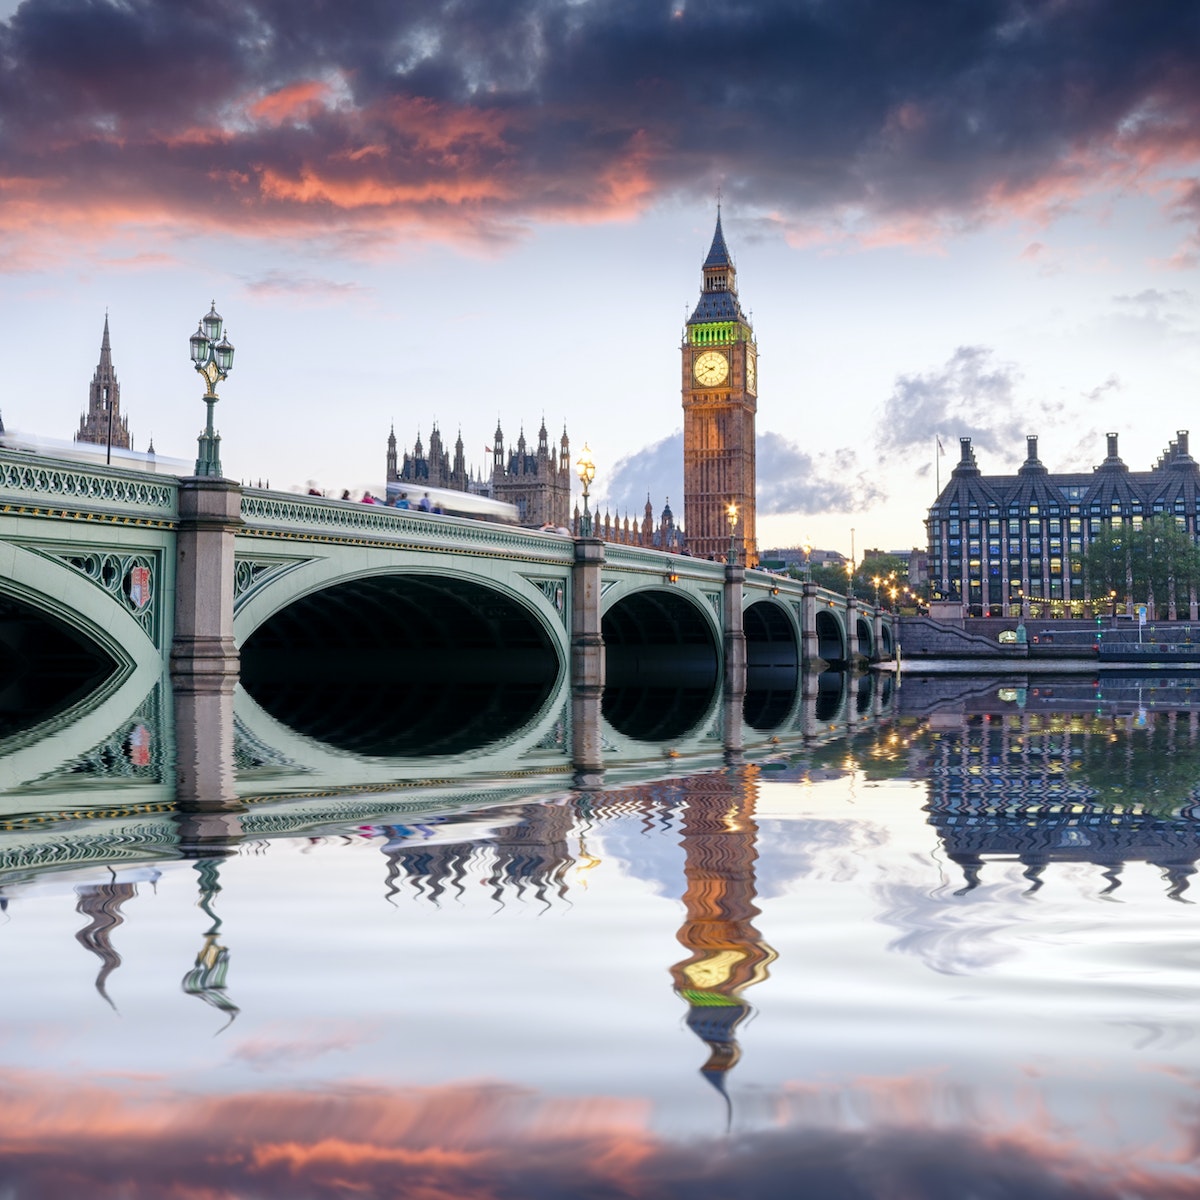 500px Photo ID: 58988372 - Dusk at Westminster Bridge and Big Ben in London